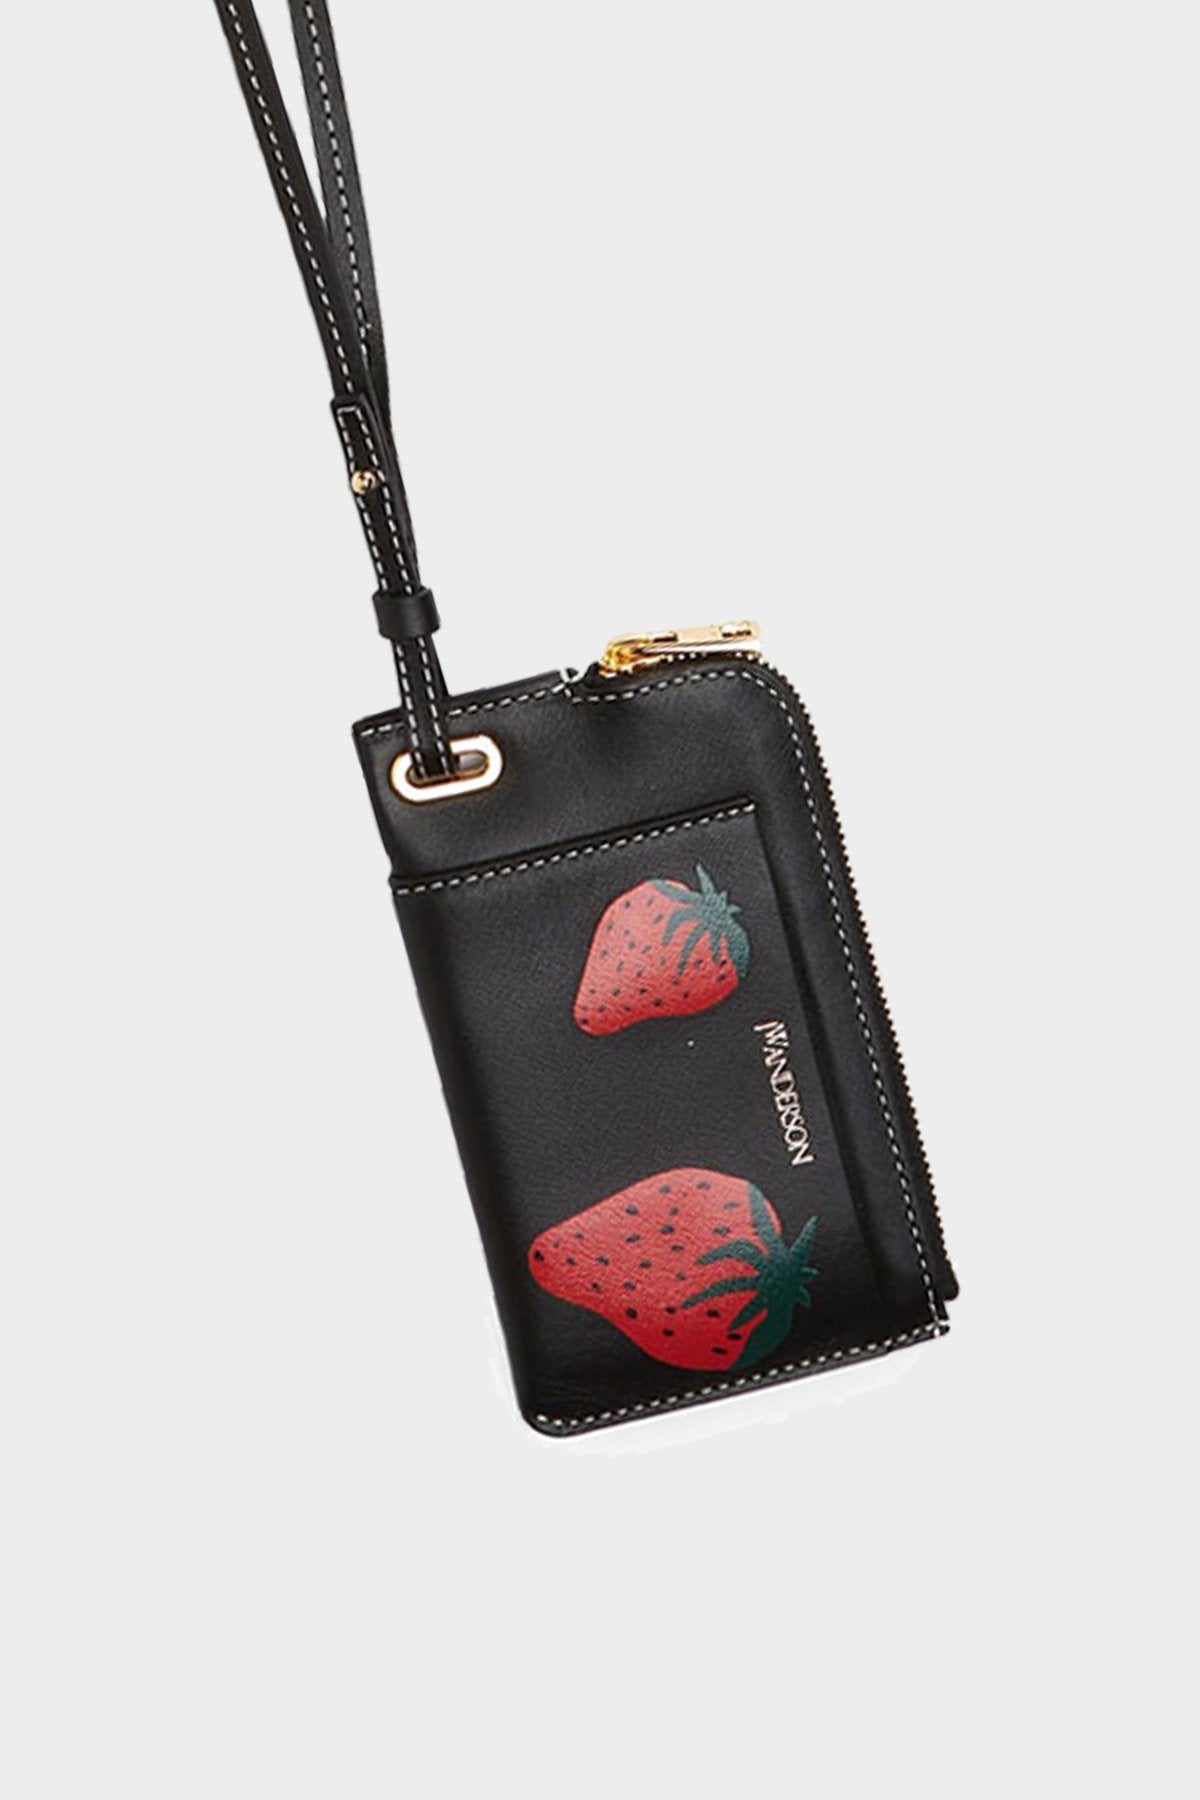 Zip-Up Cardholder with Strap in Black and Red - shop-olivia.com